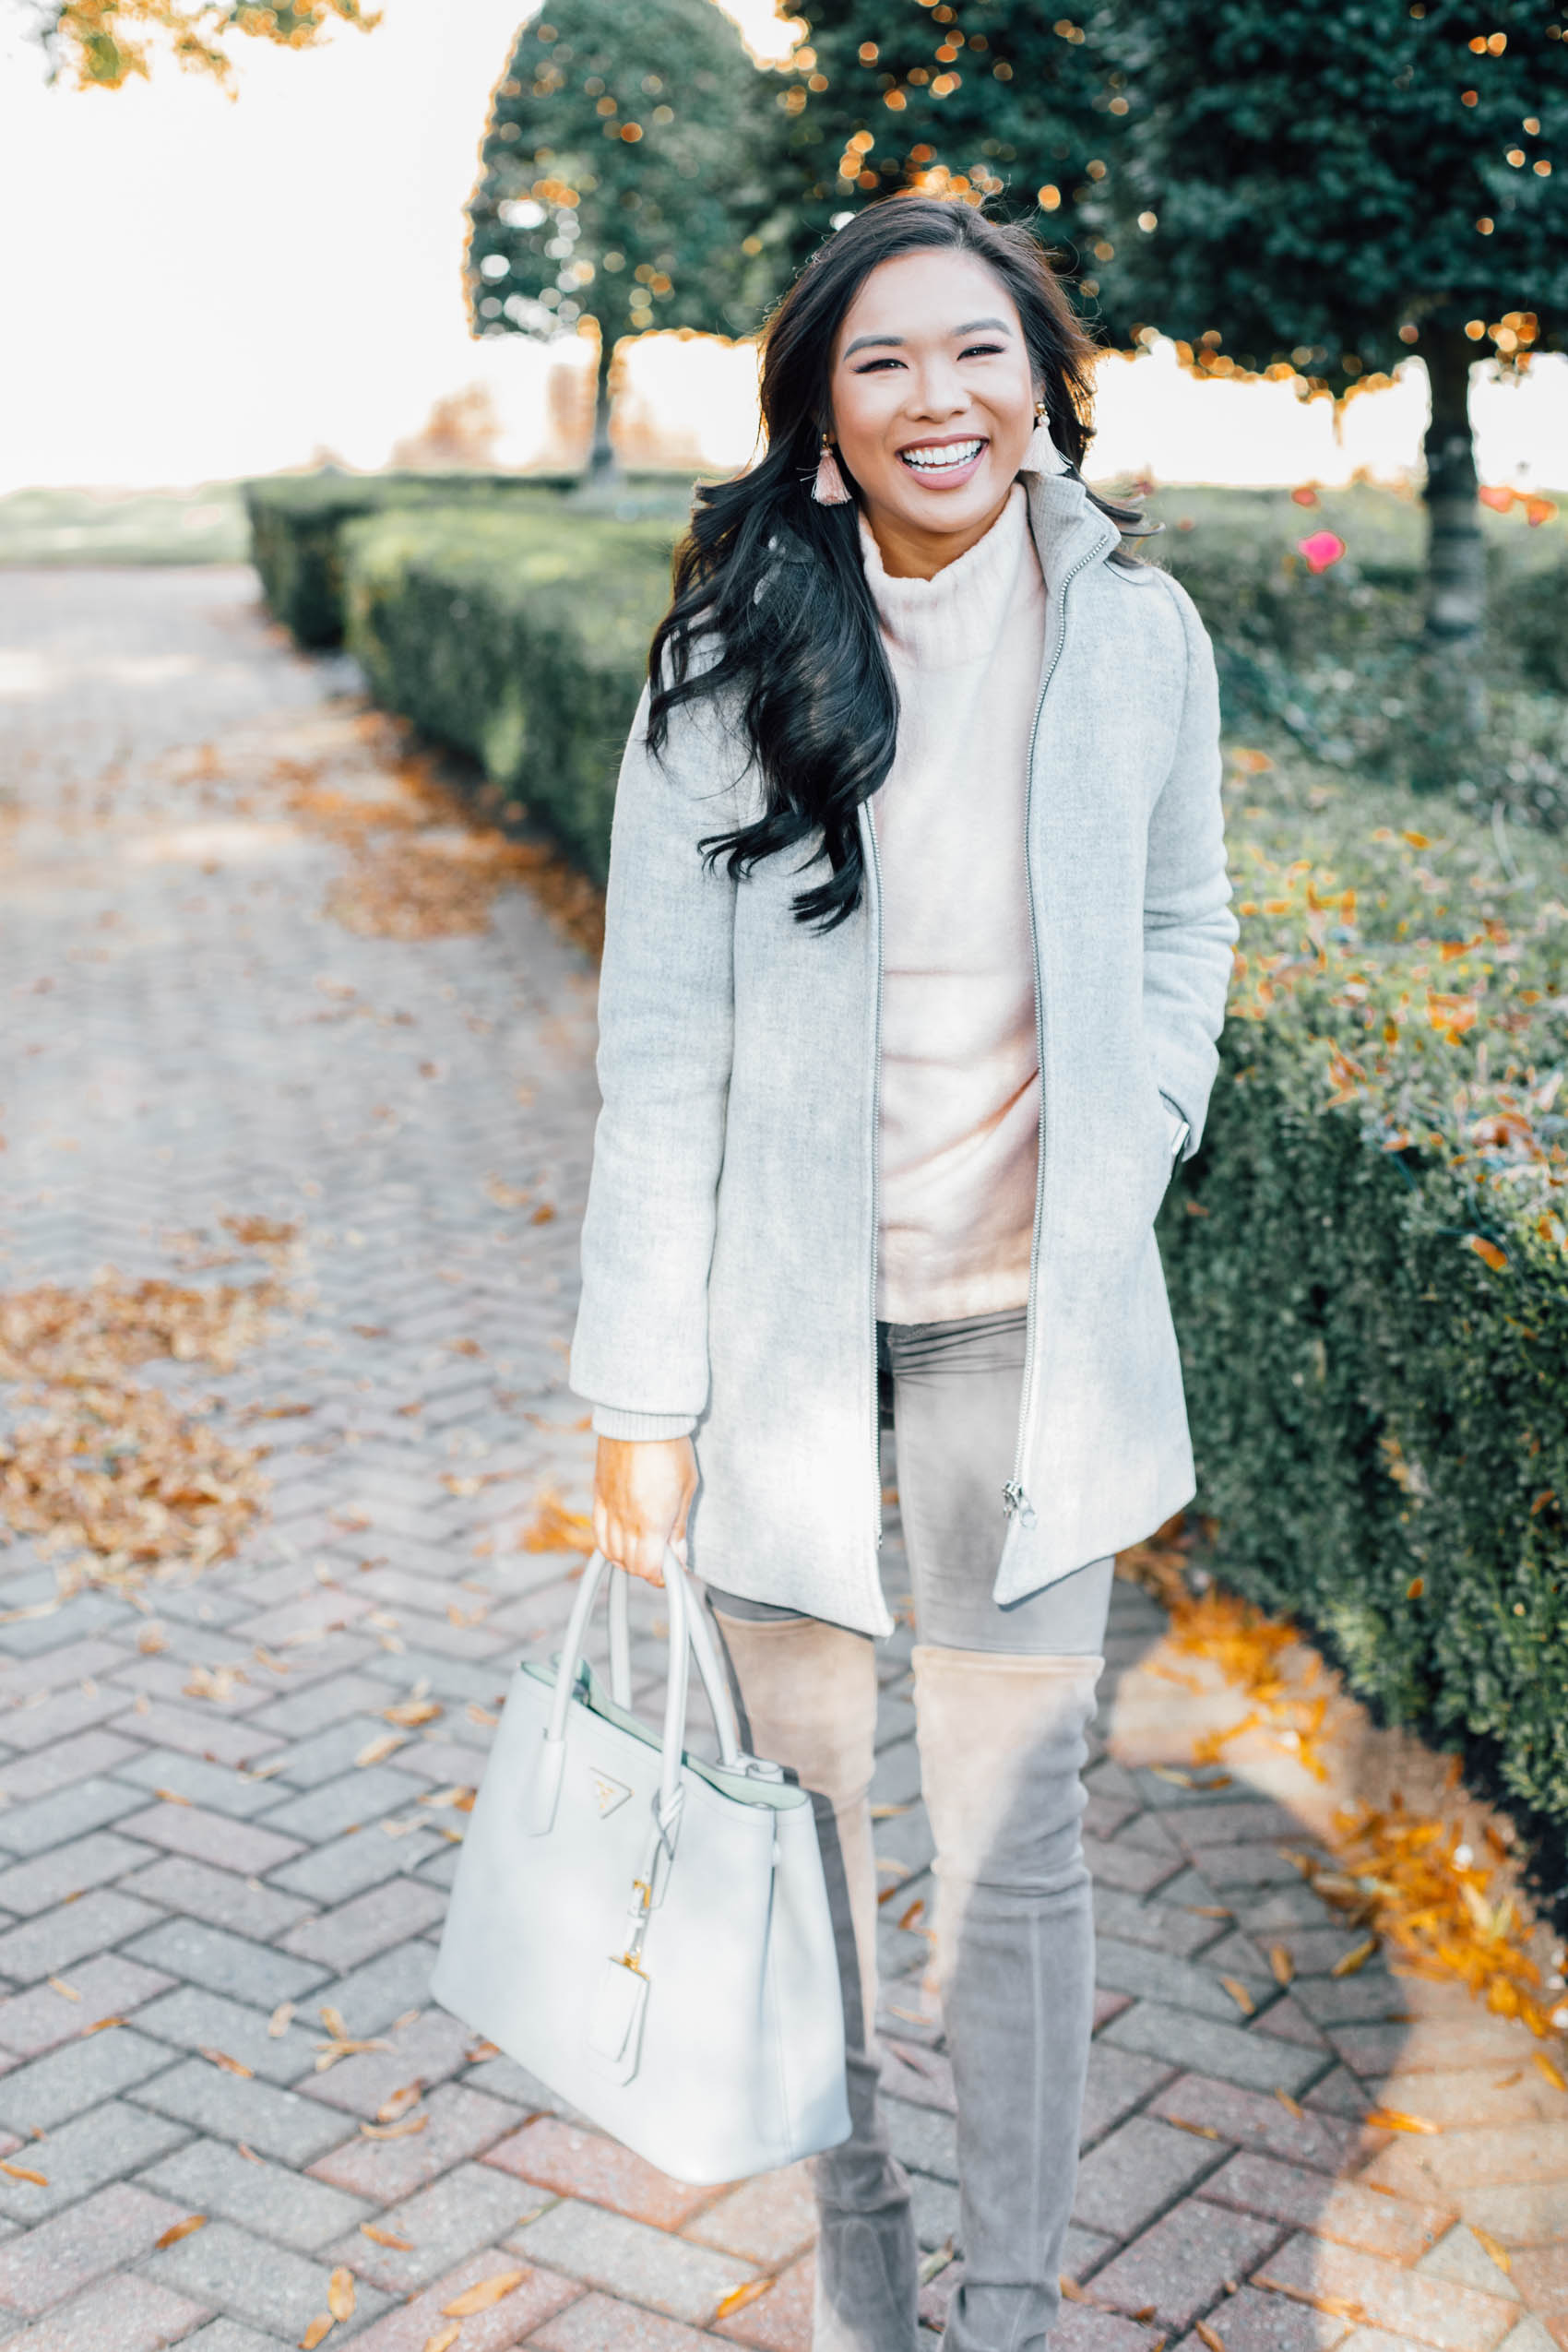 Hoang-Kim wears a wool coat for petite women with over-the-knee boots